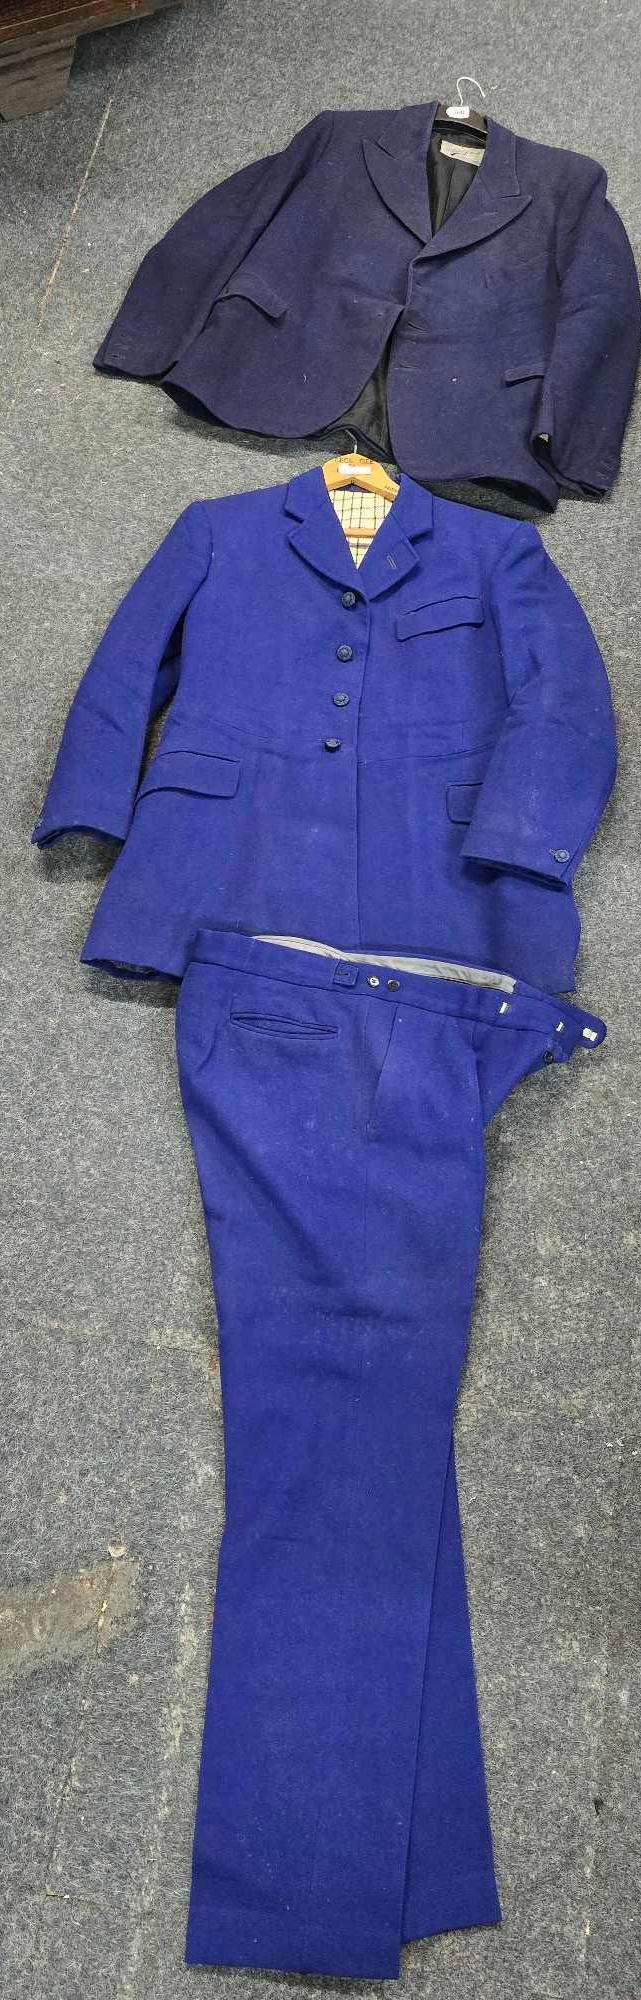 NAVY BLUE CLOTH JACKET & A BLUE JACKET & MATCHING TROUSERS, NO SIZES